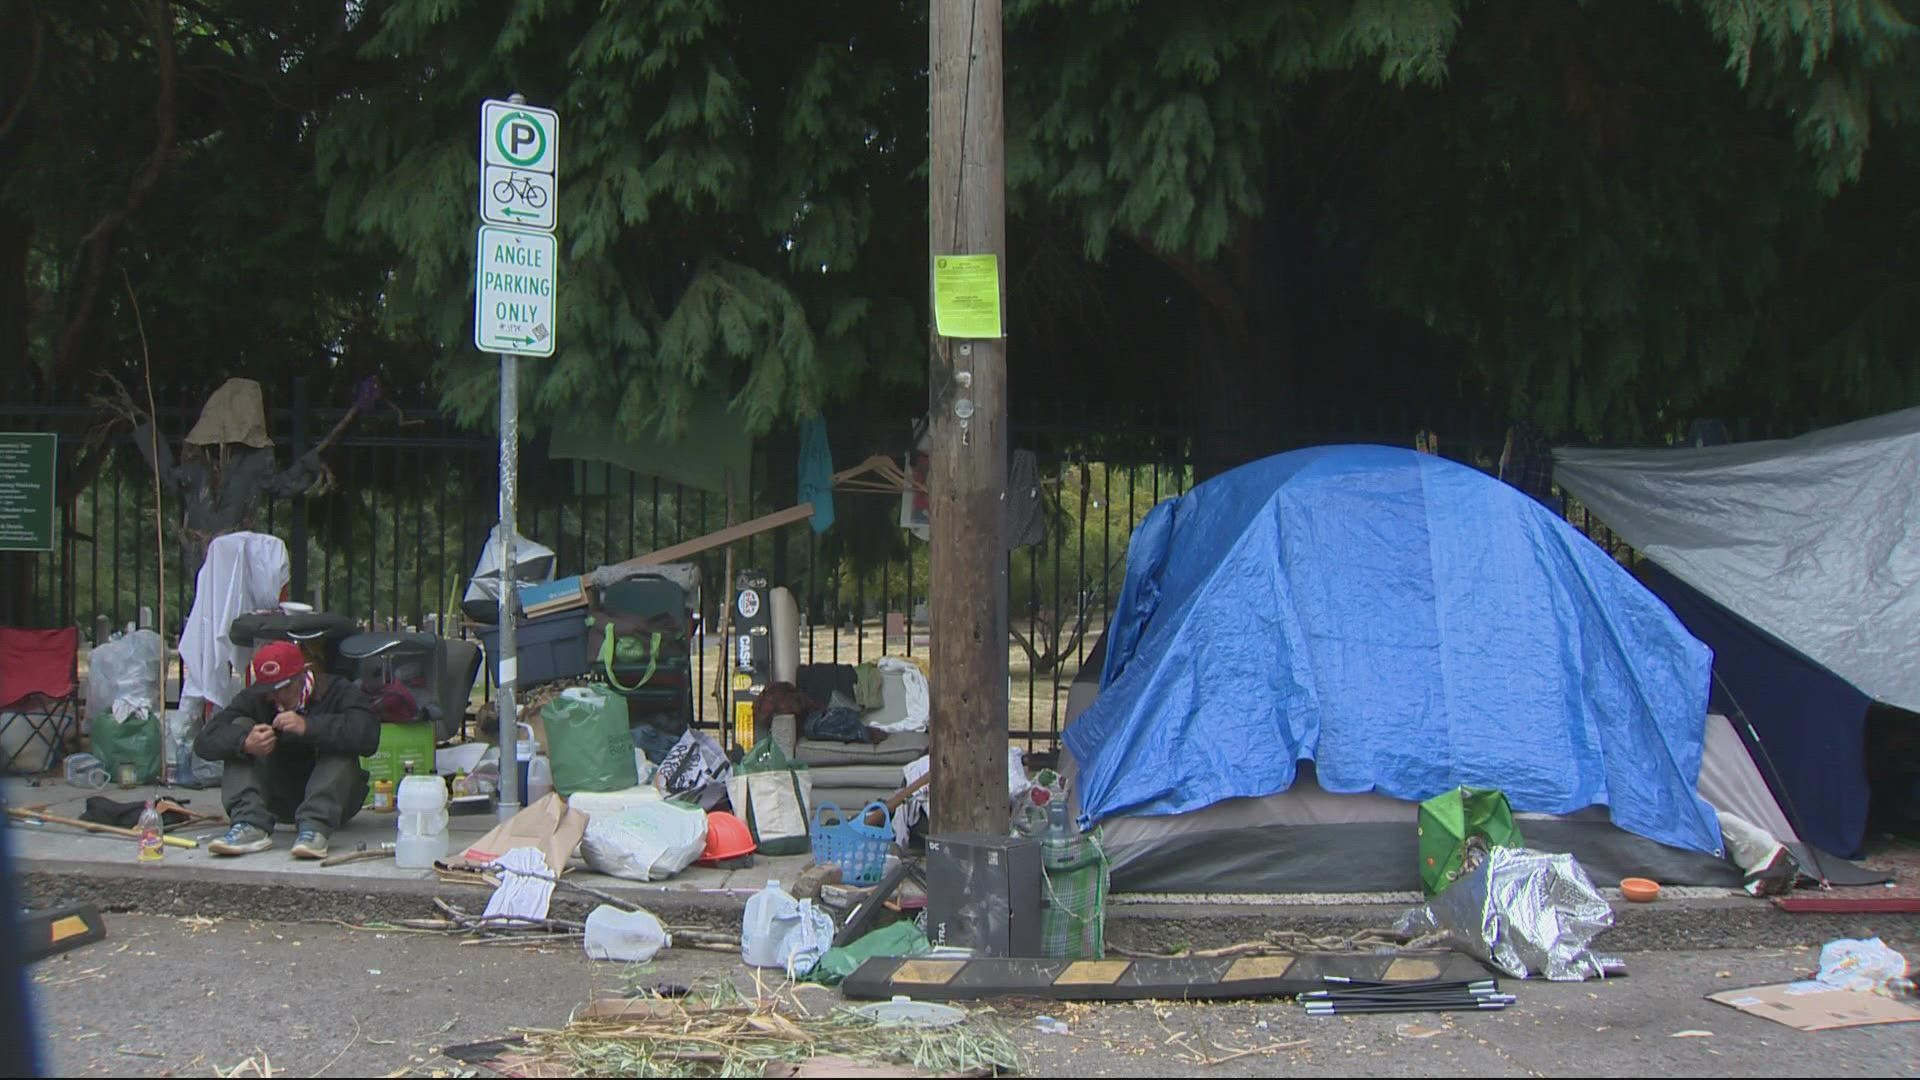 Families with loved ones buried at the southeast Portland cemetery are concerned about poor conditions and safety issues with a growing homeless camp nearby.